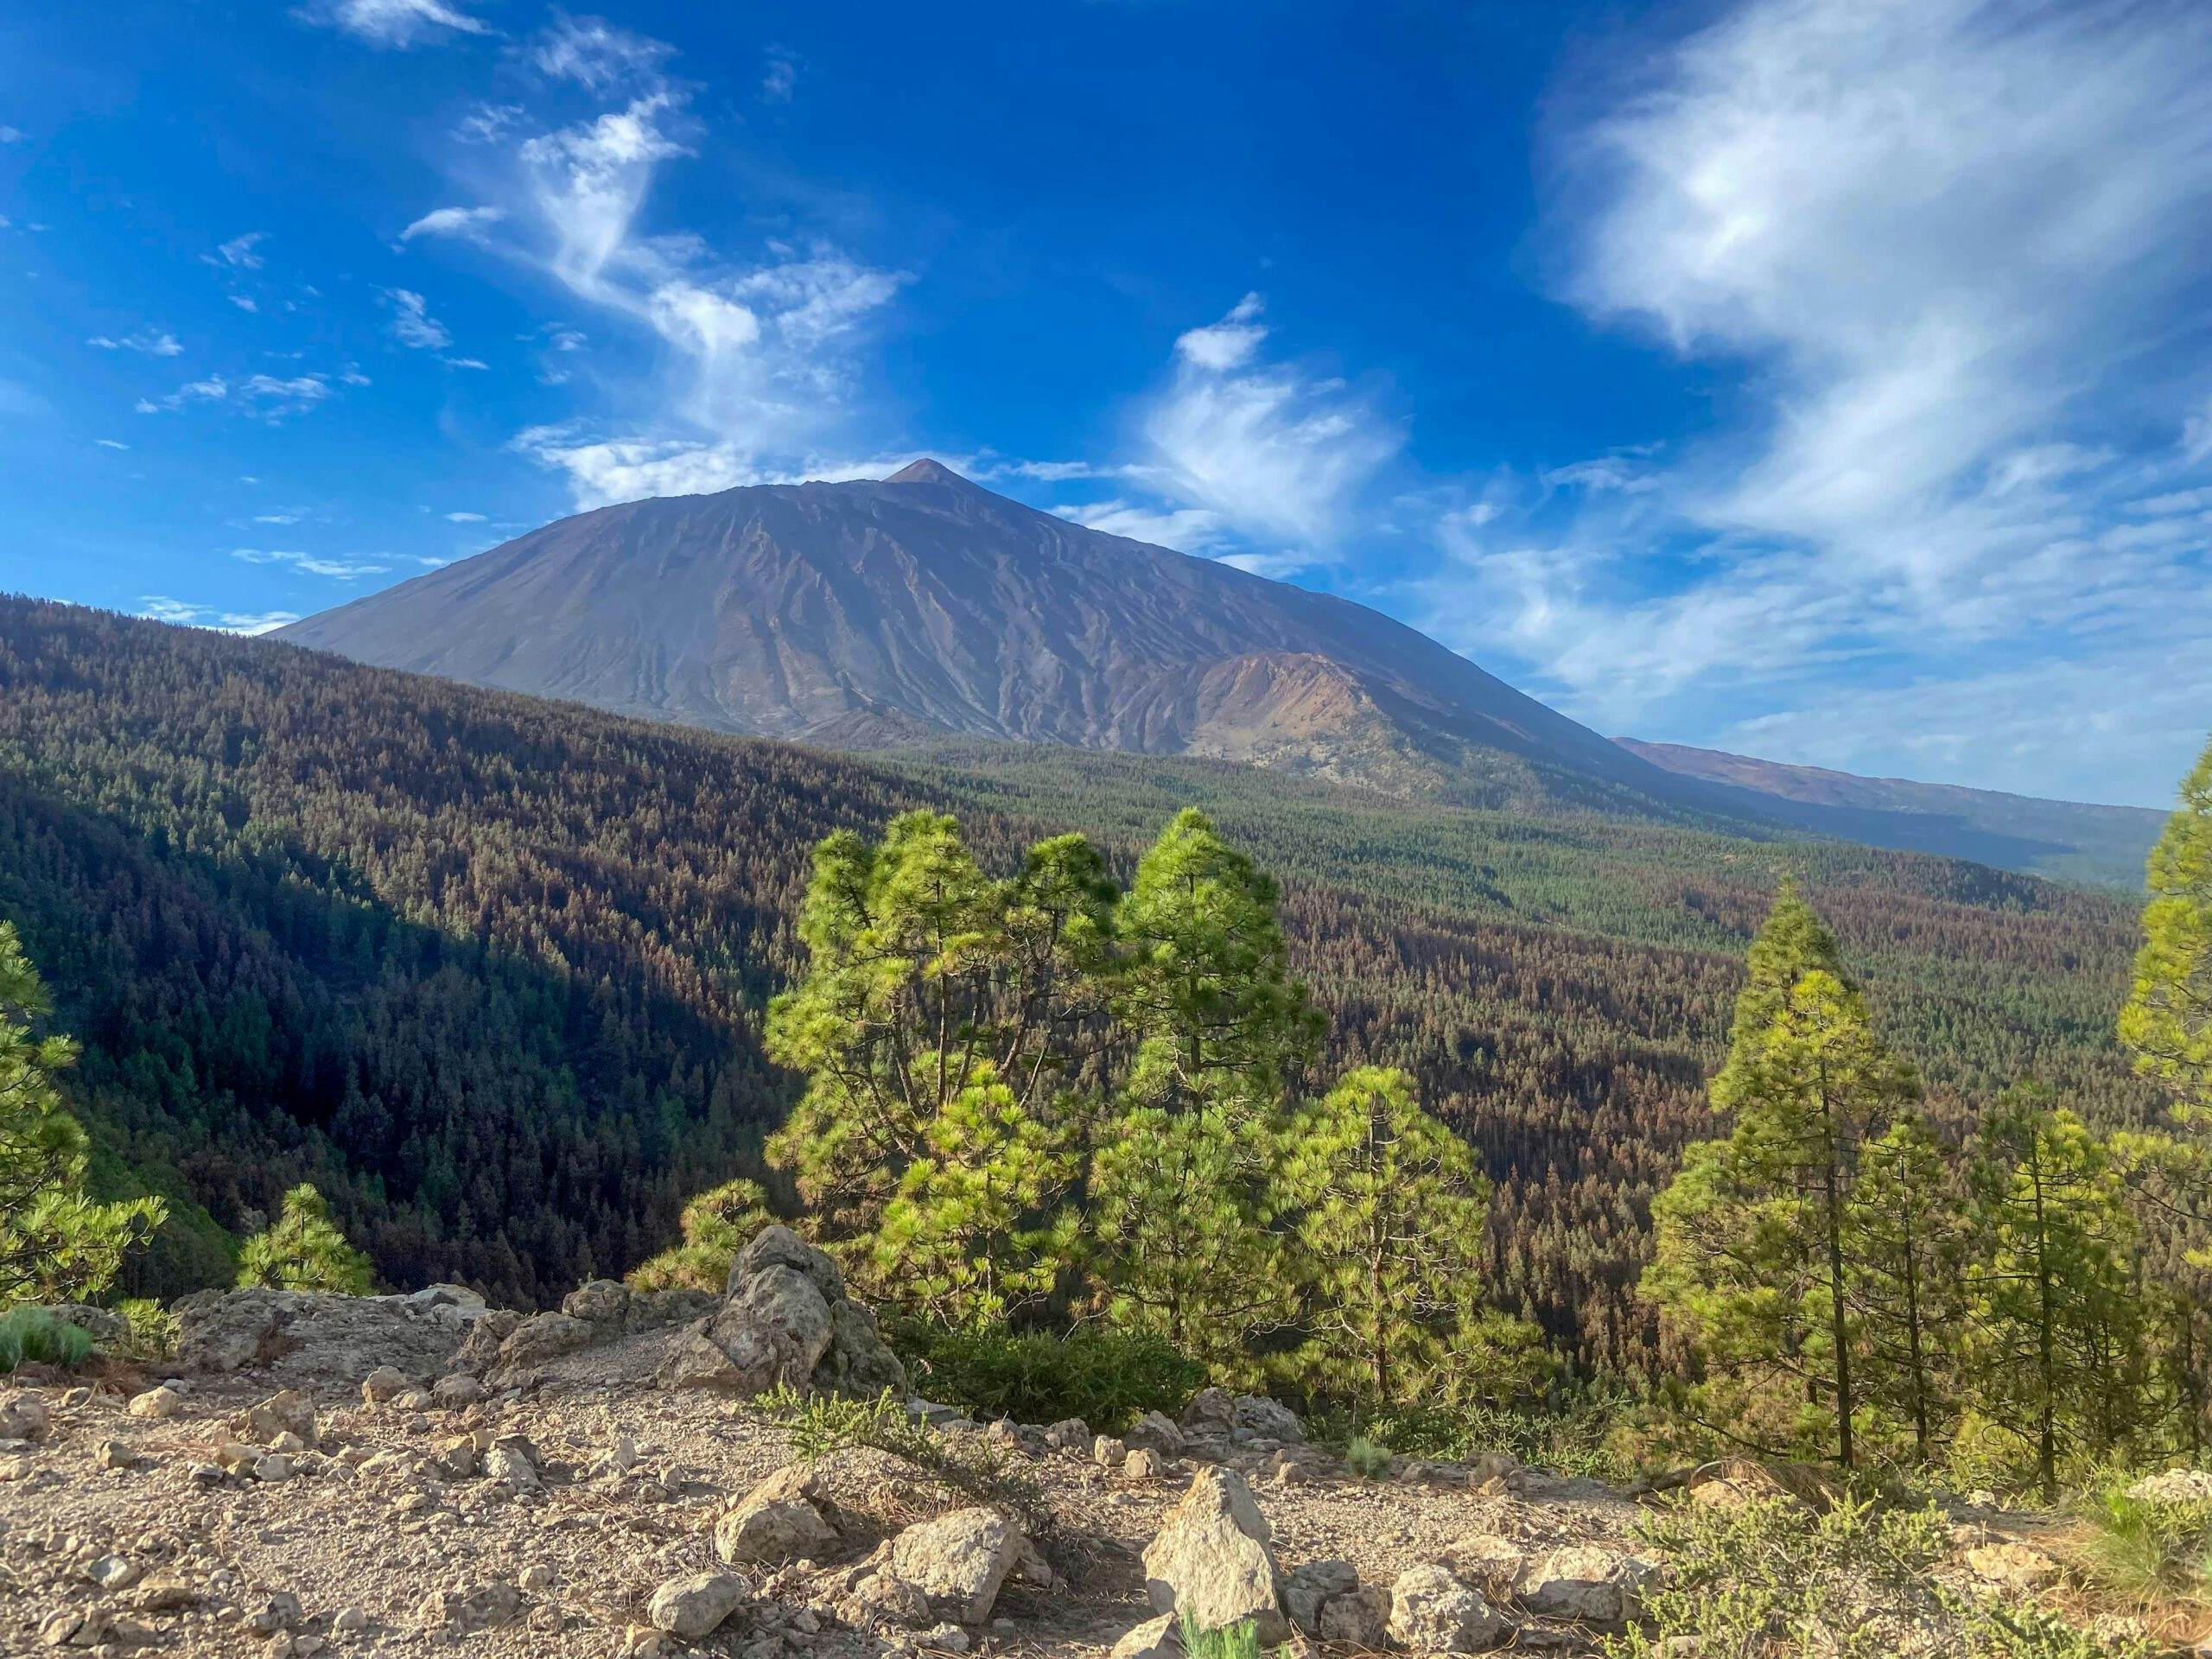 View during the ascent of the Teide